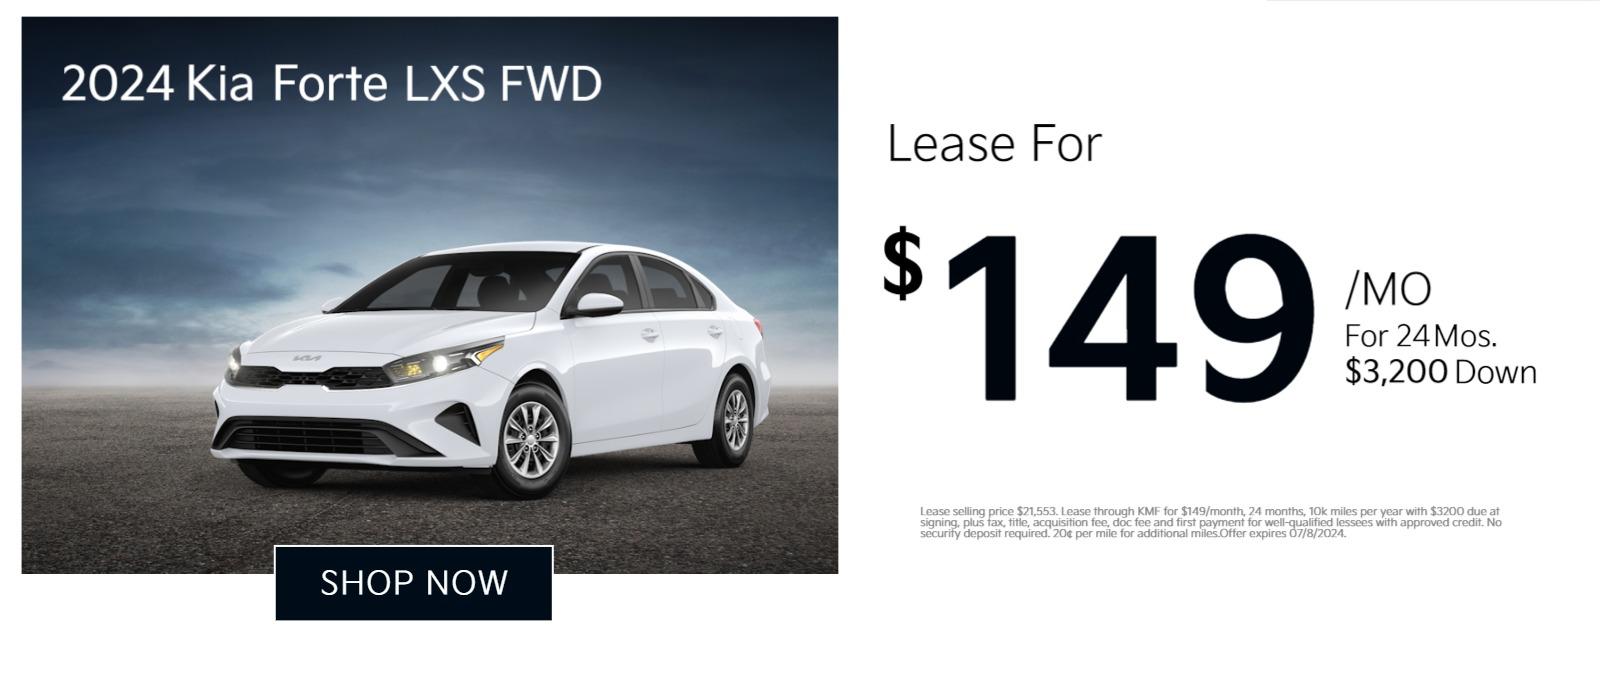 2024 Kia Forte LXS FWD
Lease for
$149/mo
For 24 Months. $3,200 Down